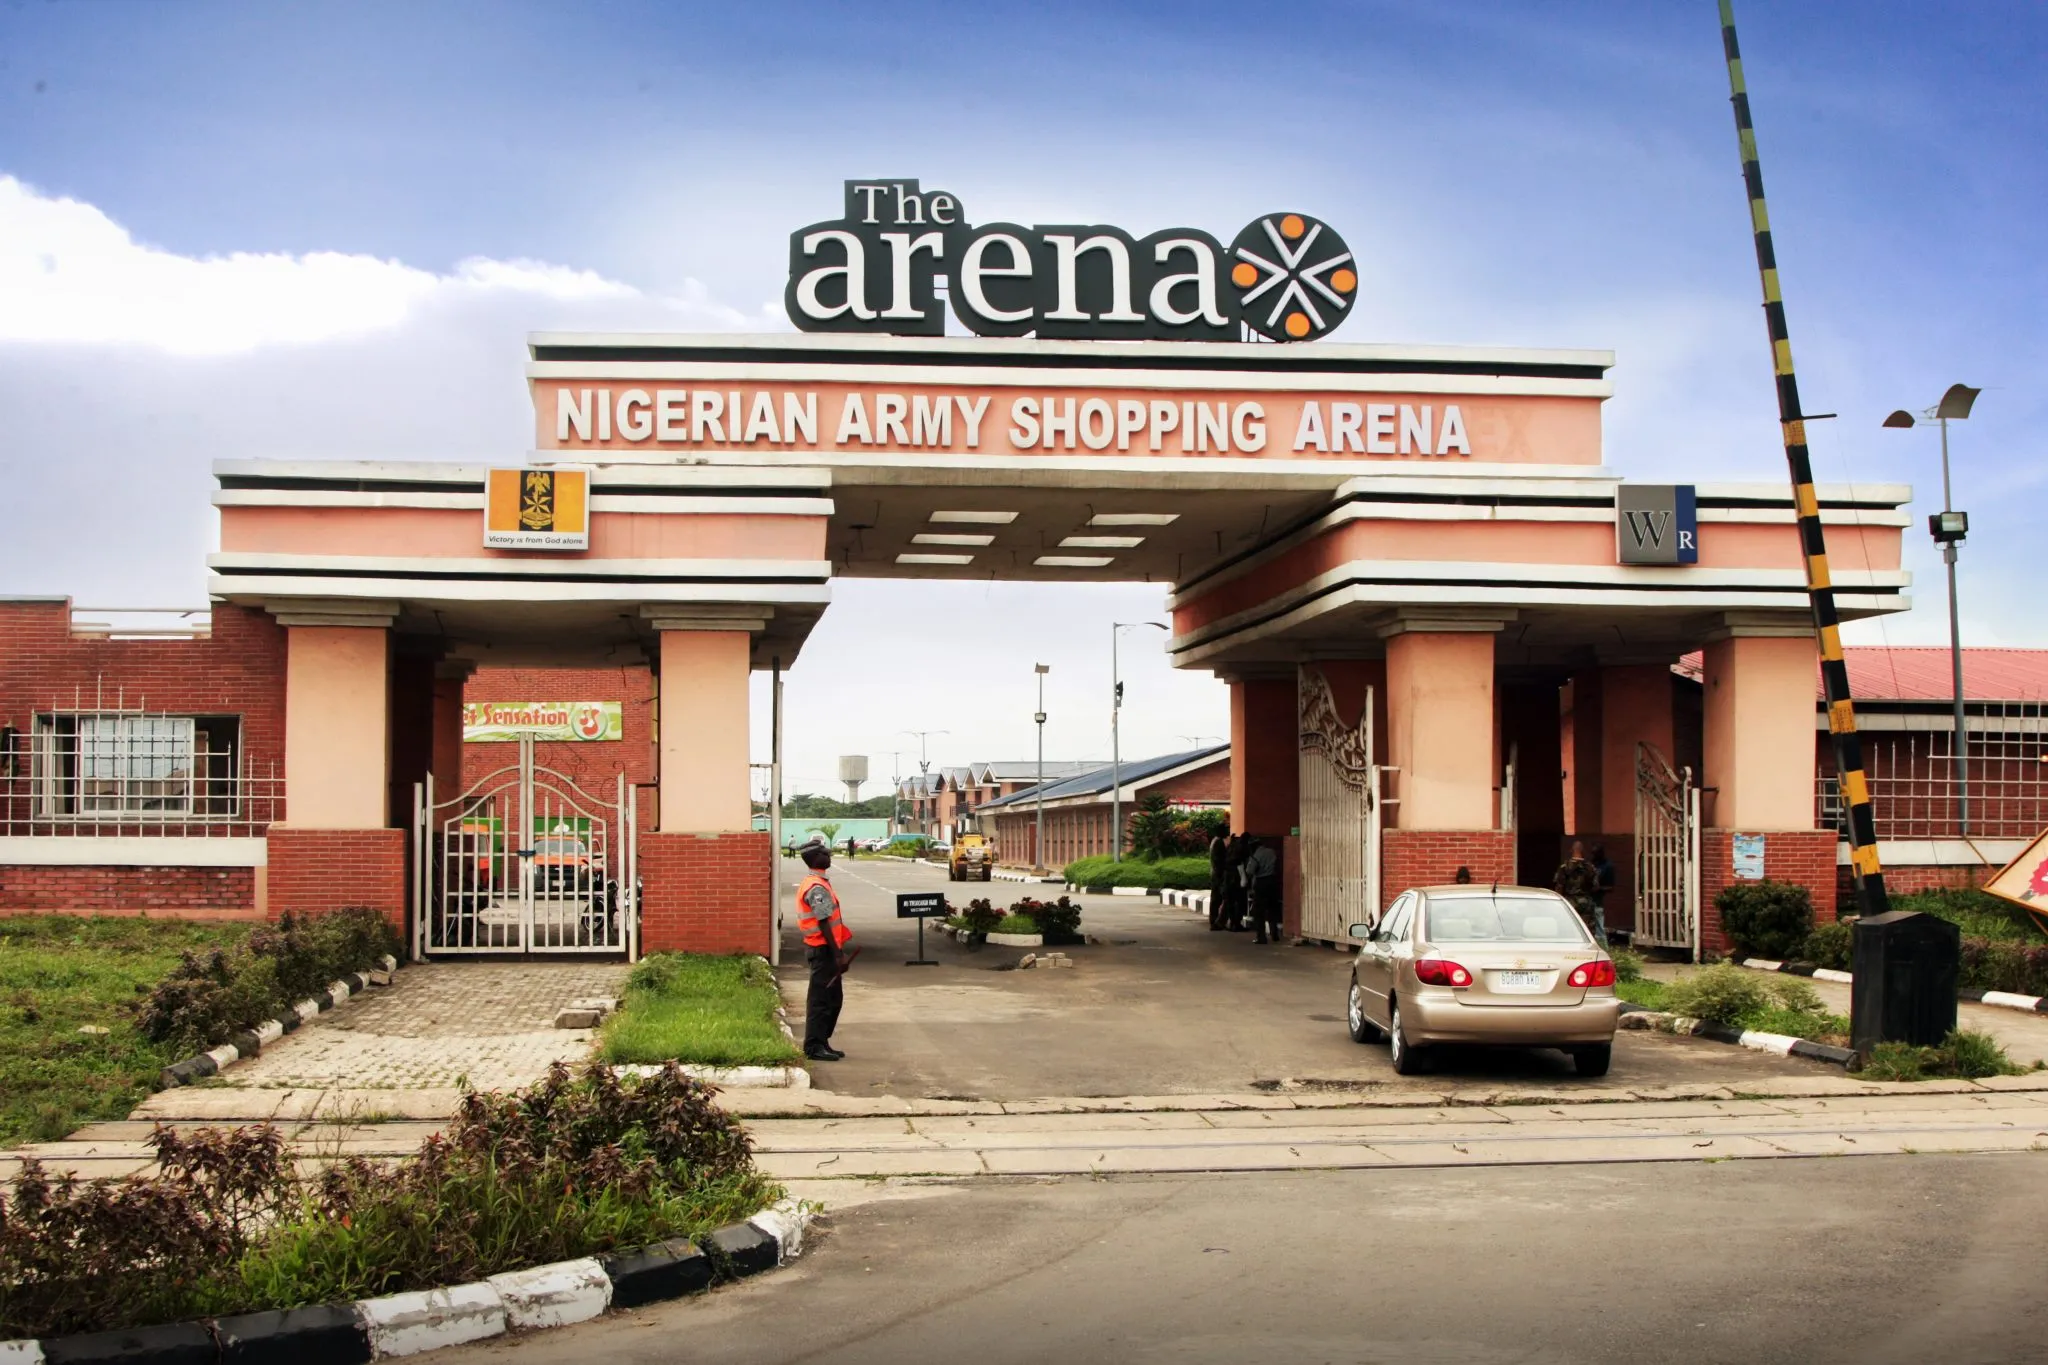 The Arena Nigerian Army Shopping Arena in Nigeria, africa | Fragrance,Handbags,Shoes,Accessories,Clothes,Cosmetics,Sportswear - Country Helper